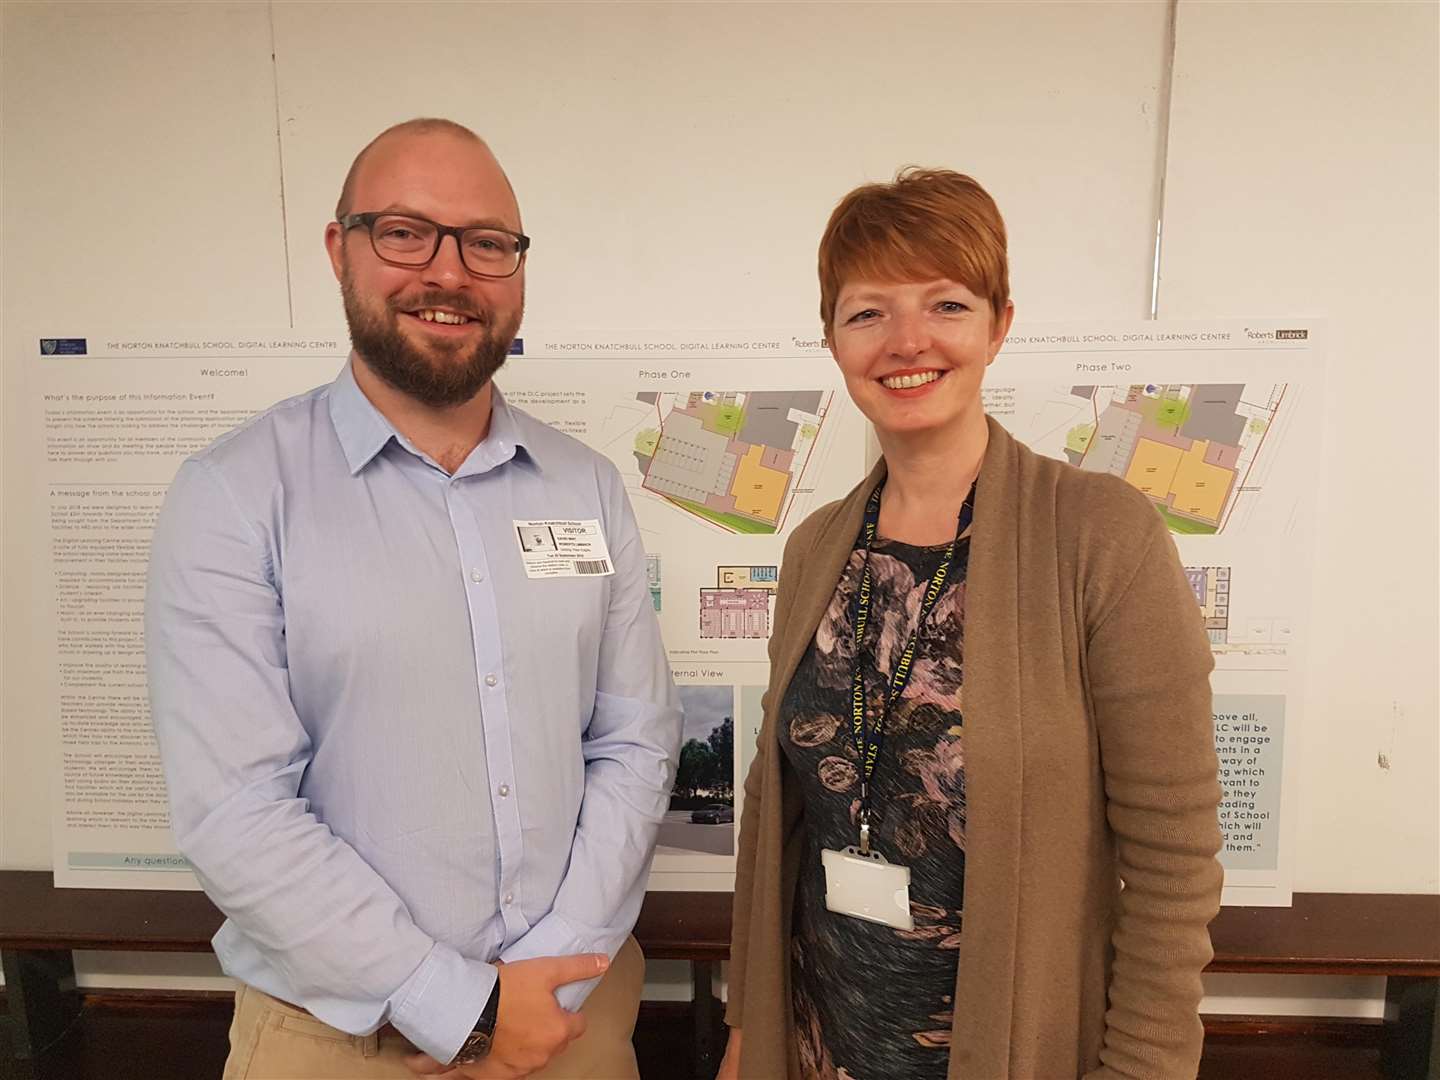 David Wint, from architect Roberts Limbrick, with head teacher Susanne Staab